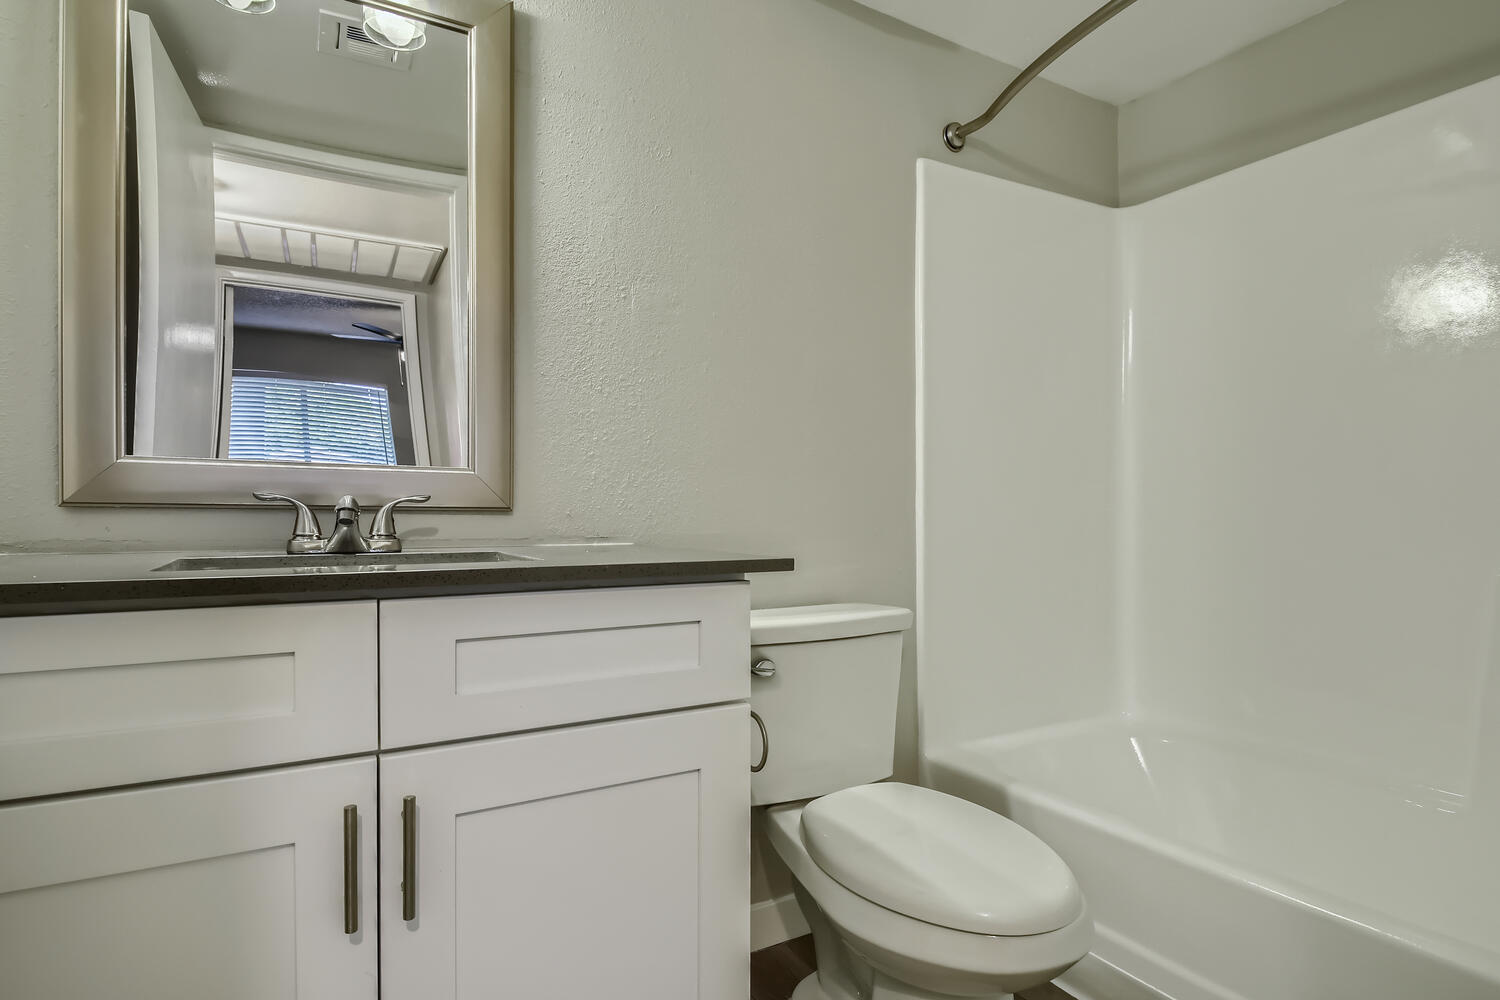 A bathroom with a vanity, mirror and a shower at Rise North Ridge.